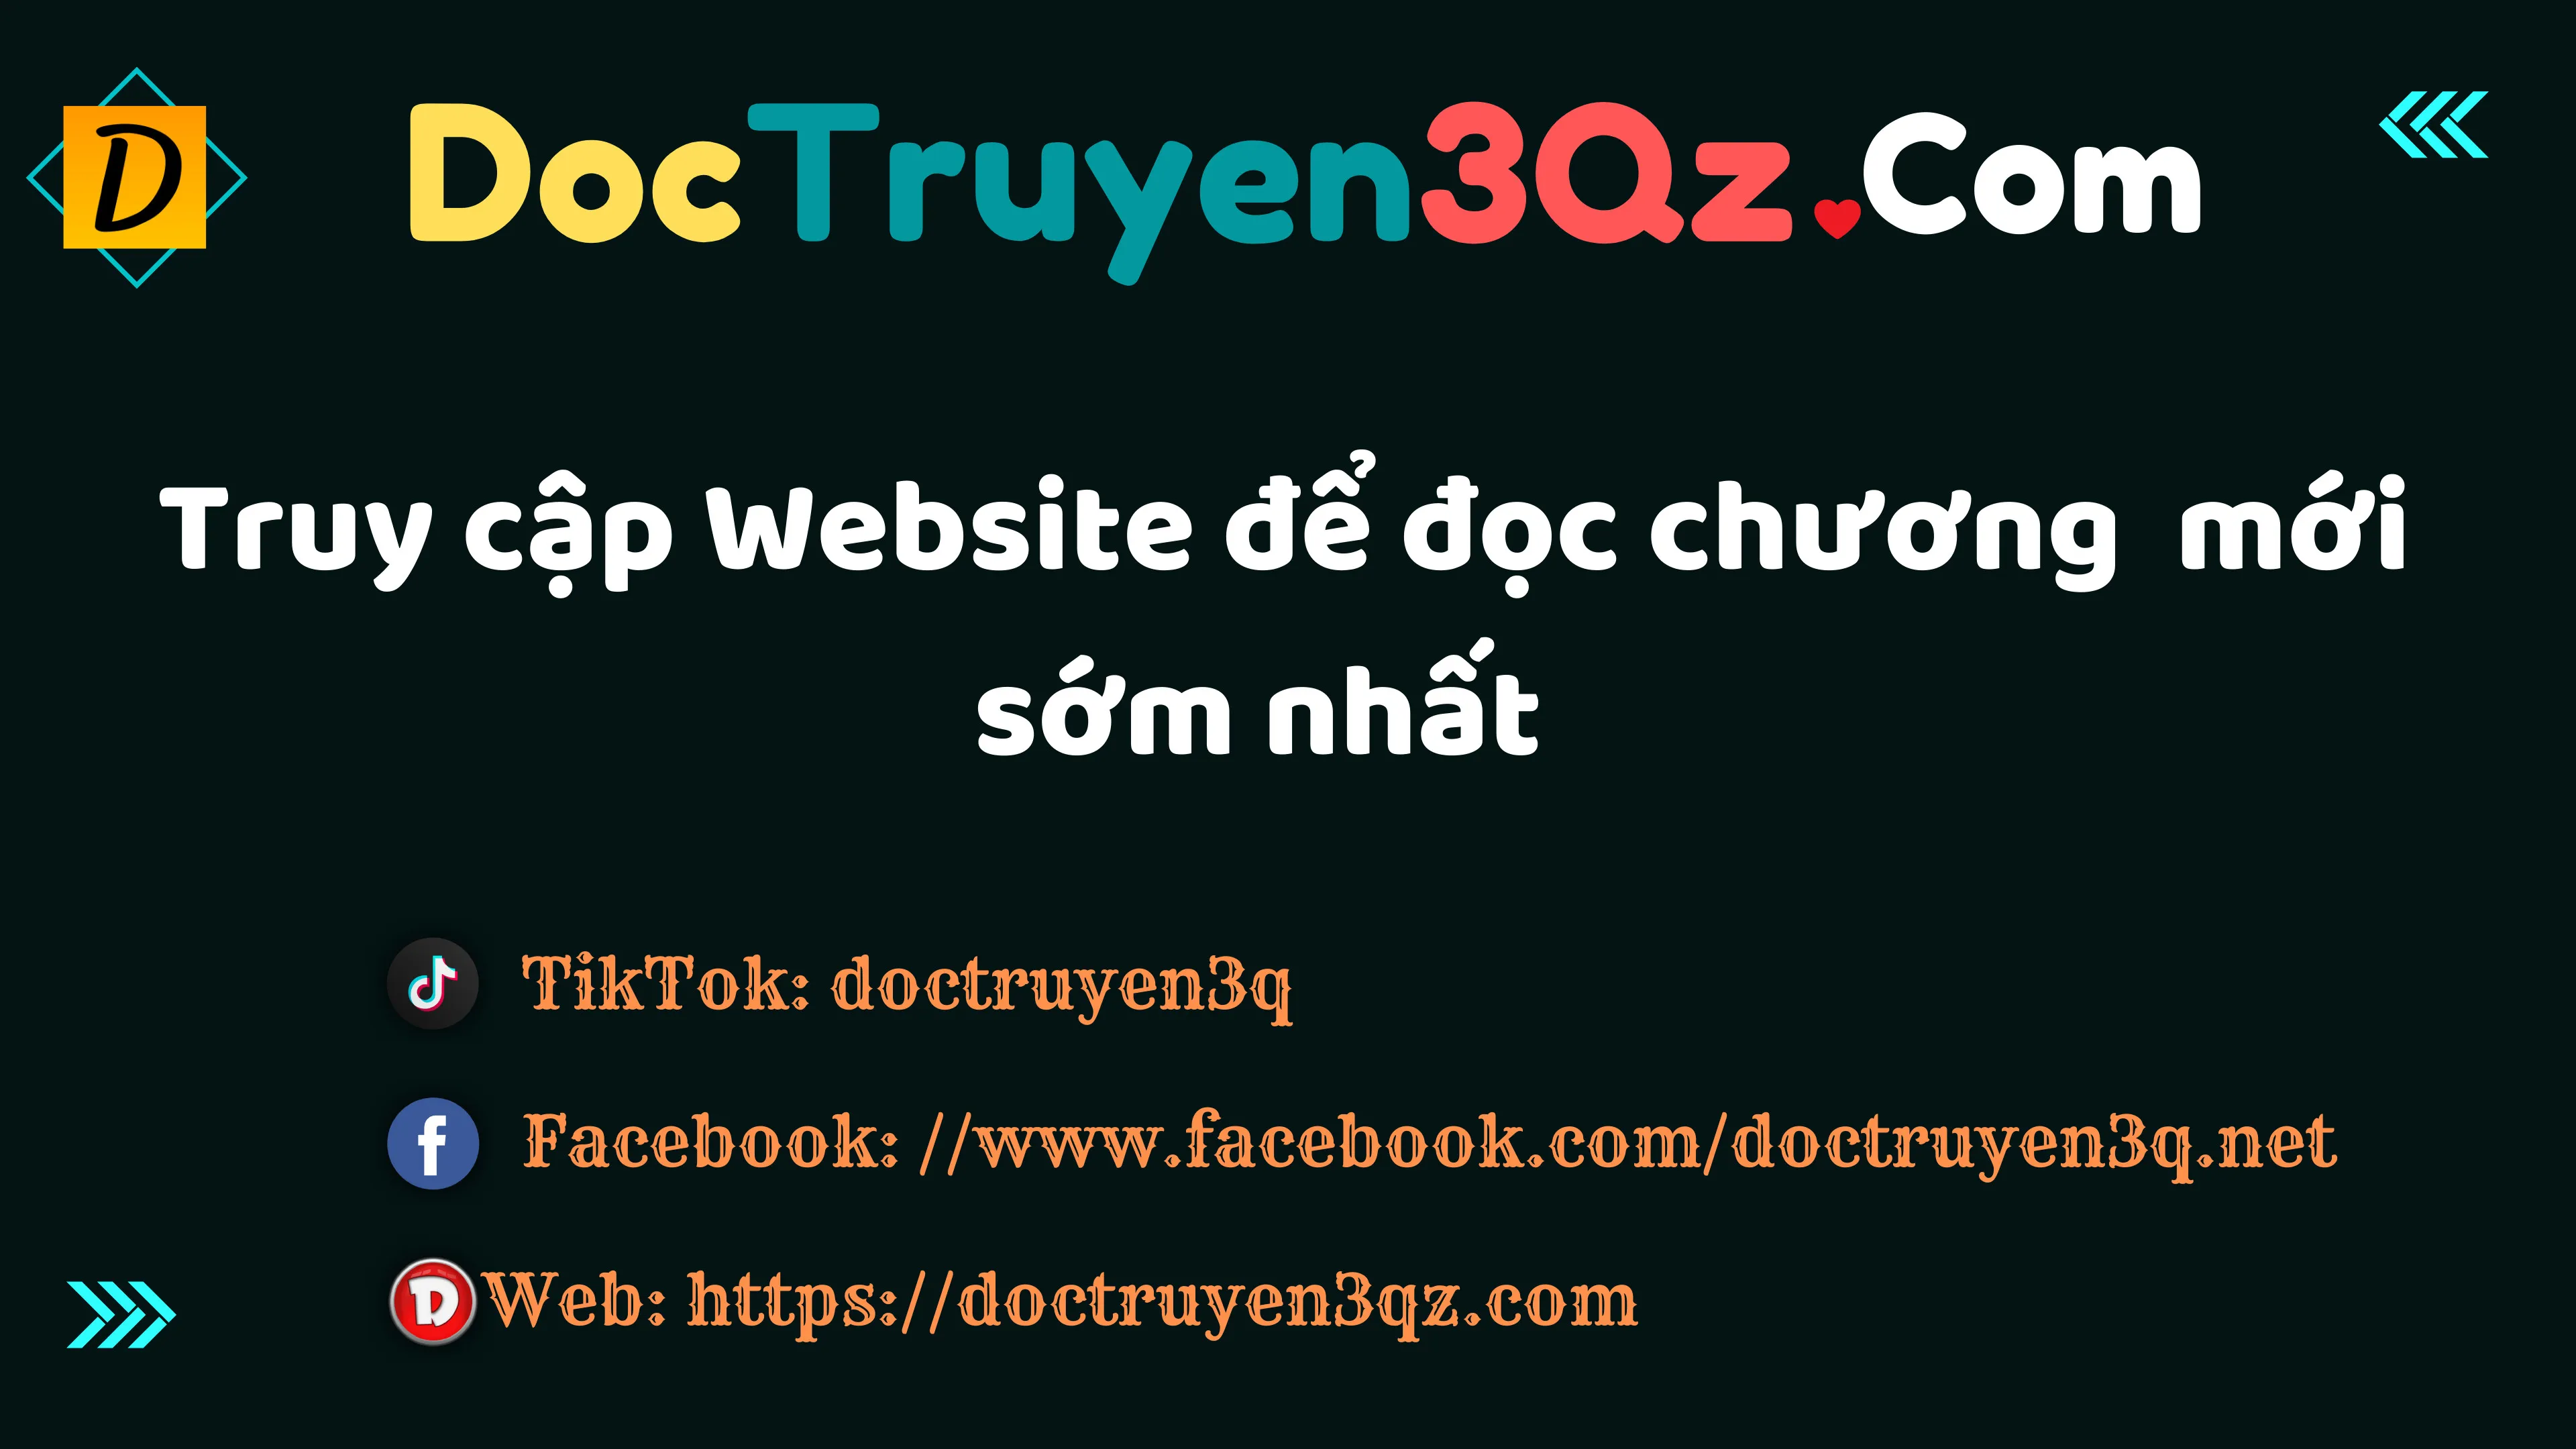 ta tro thanh con gai nuoi cua nam chinh chapter 25 724f228f51a49b47bedecfc3d3acd0be